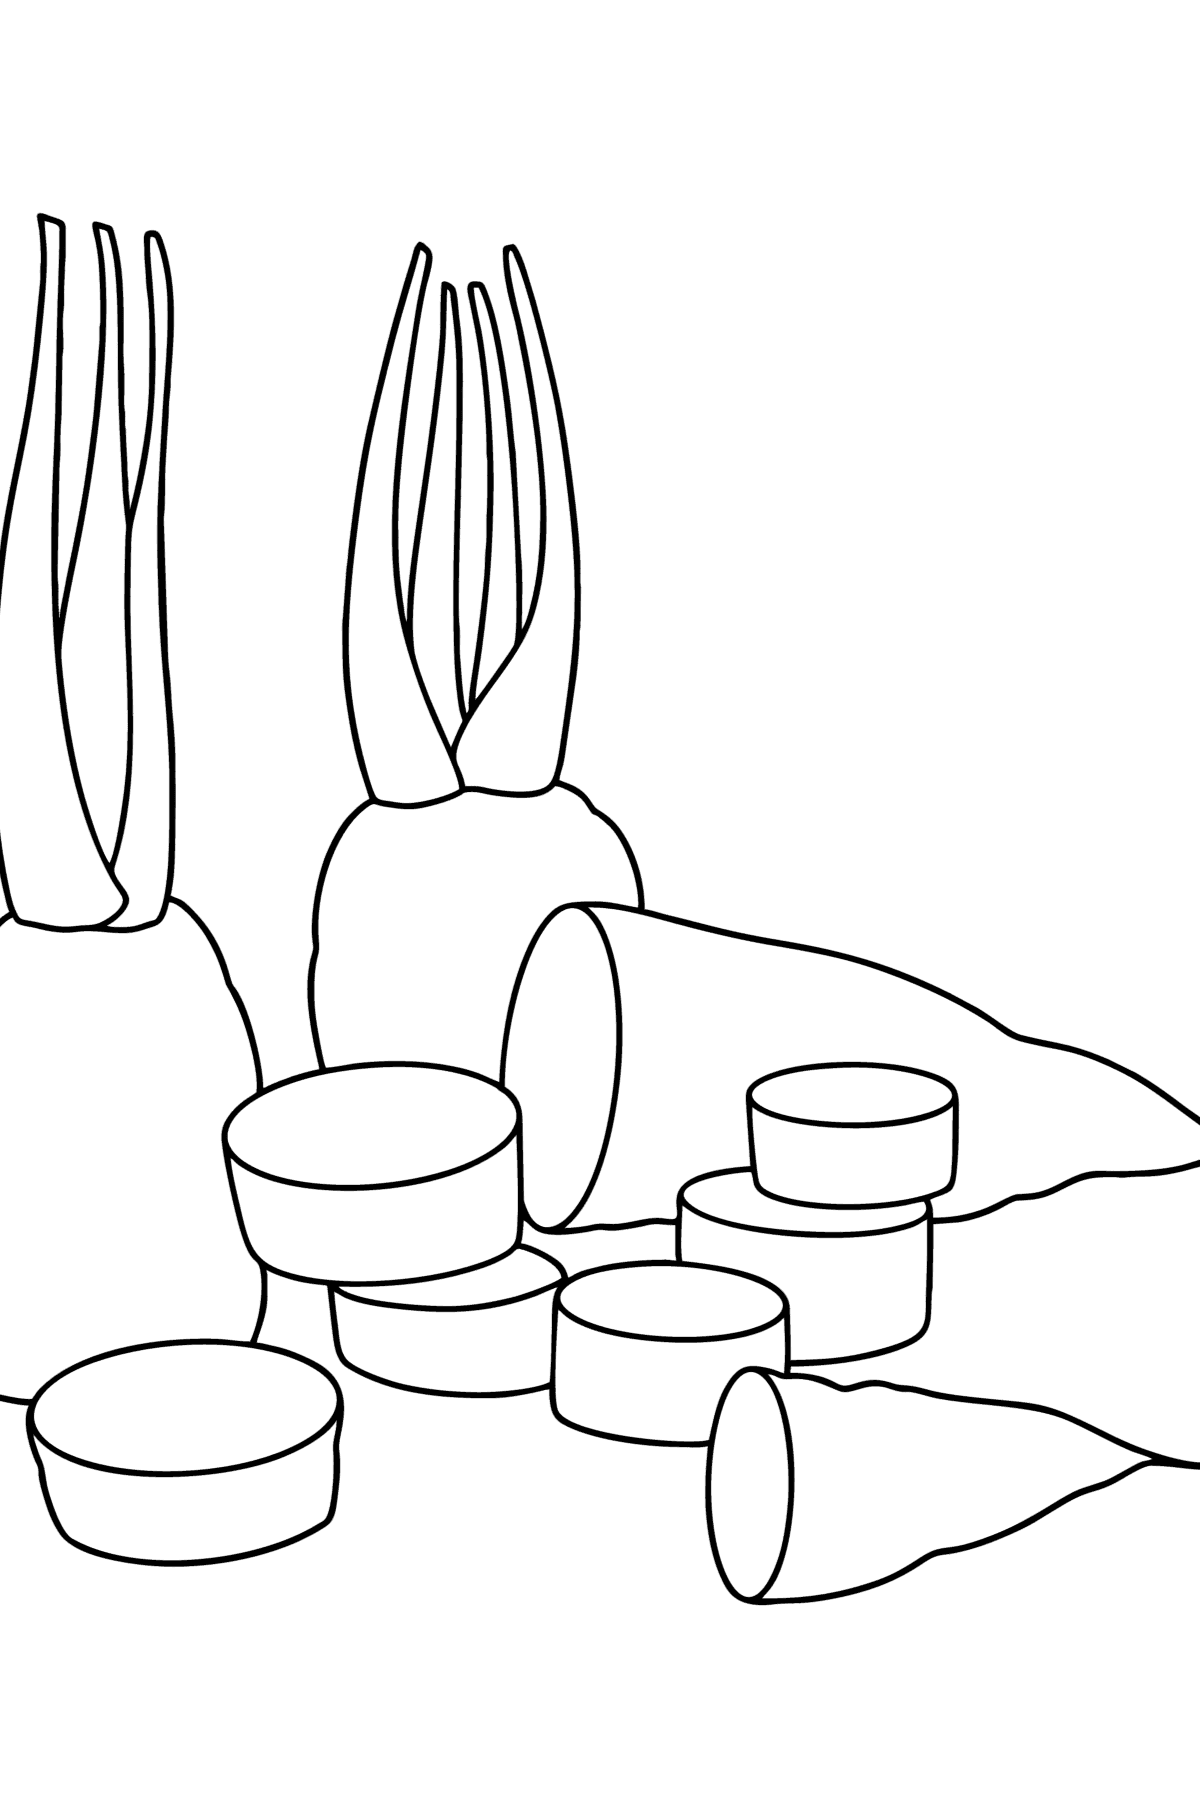 Sliced carrots сoloring page - Coloring Pages for Kids